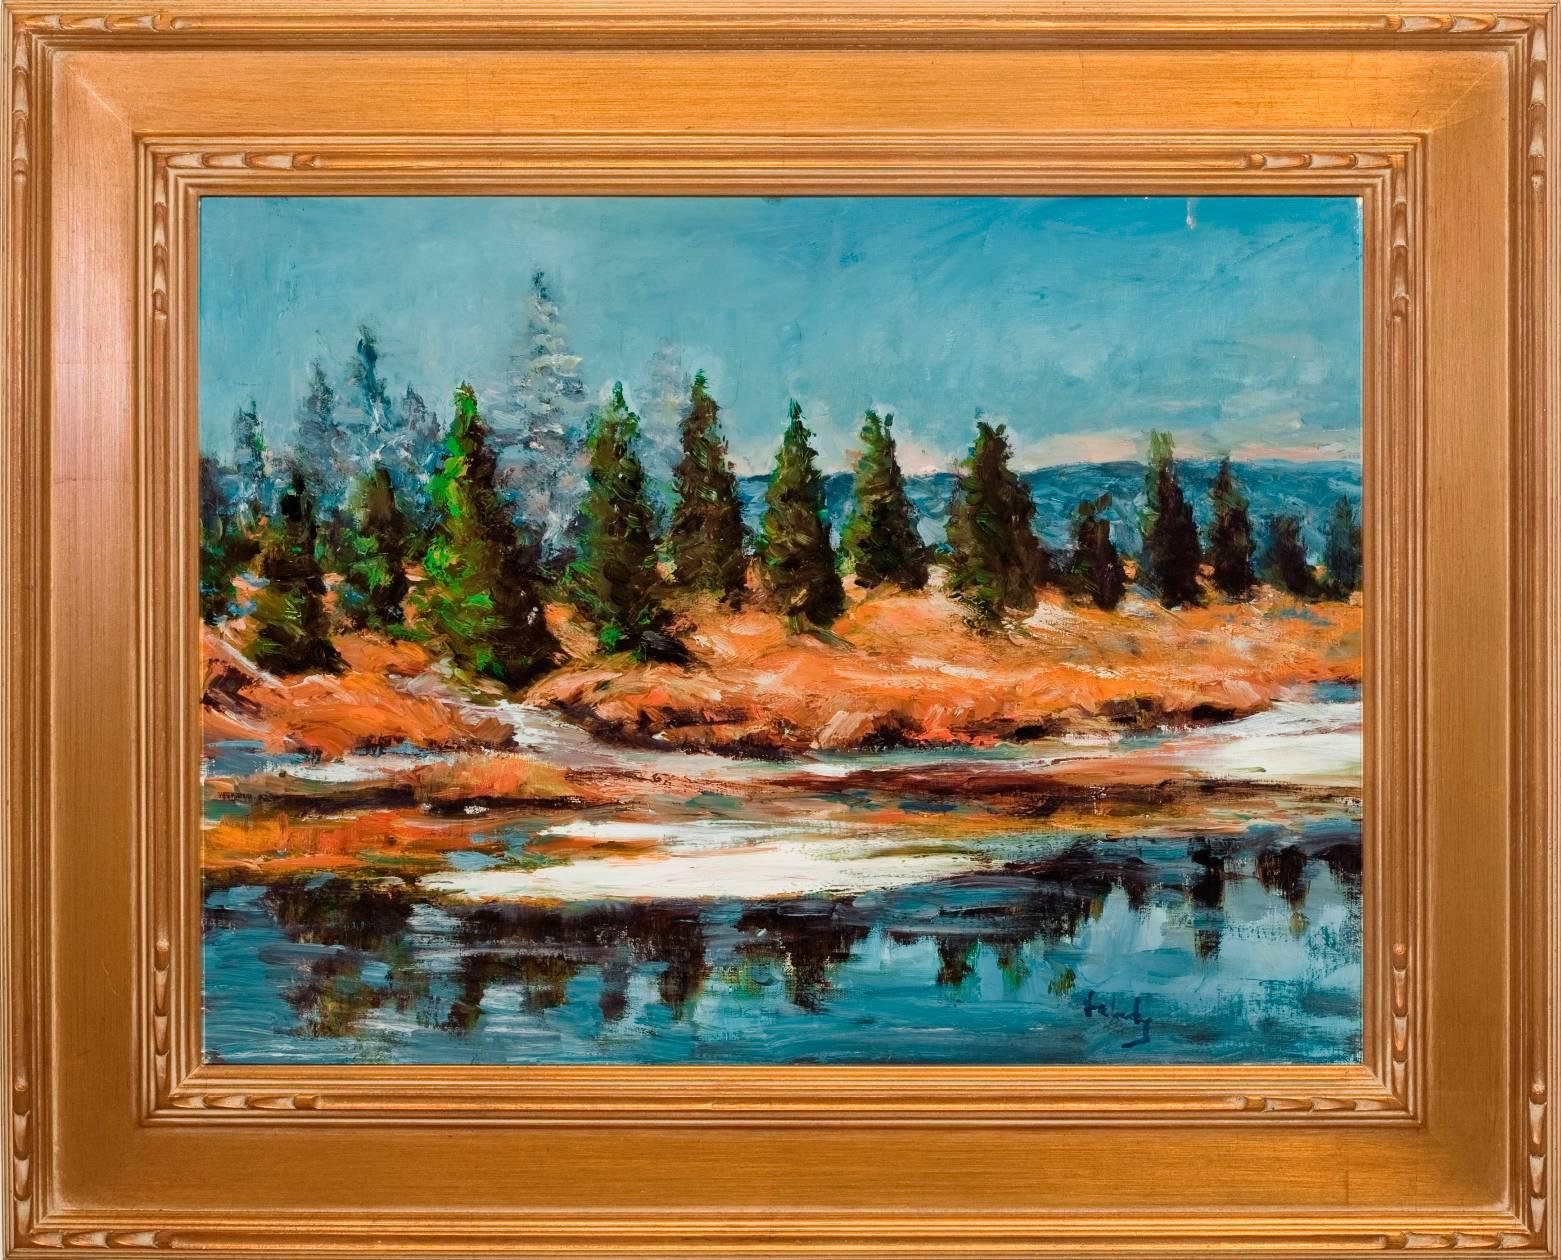 Evelyn Faherty Landscape Painting - "Beneath the Pines"